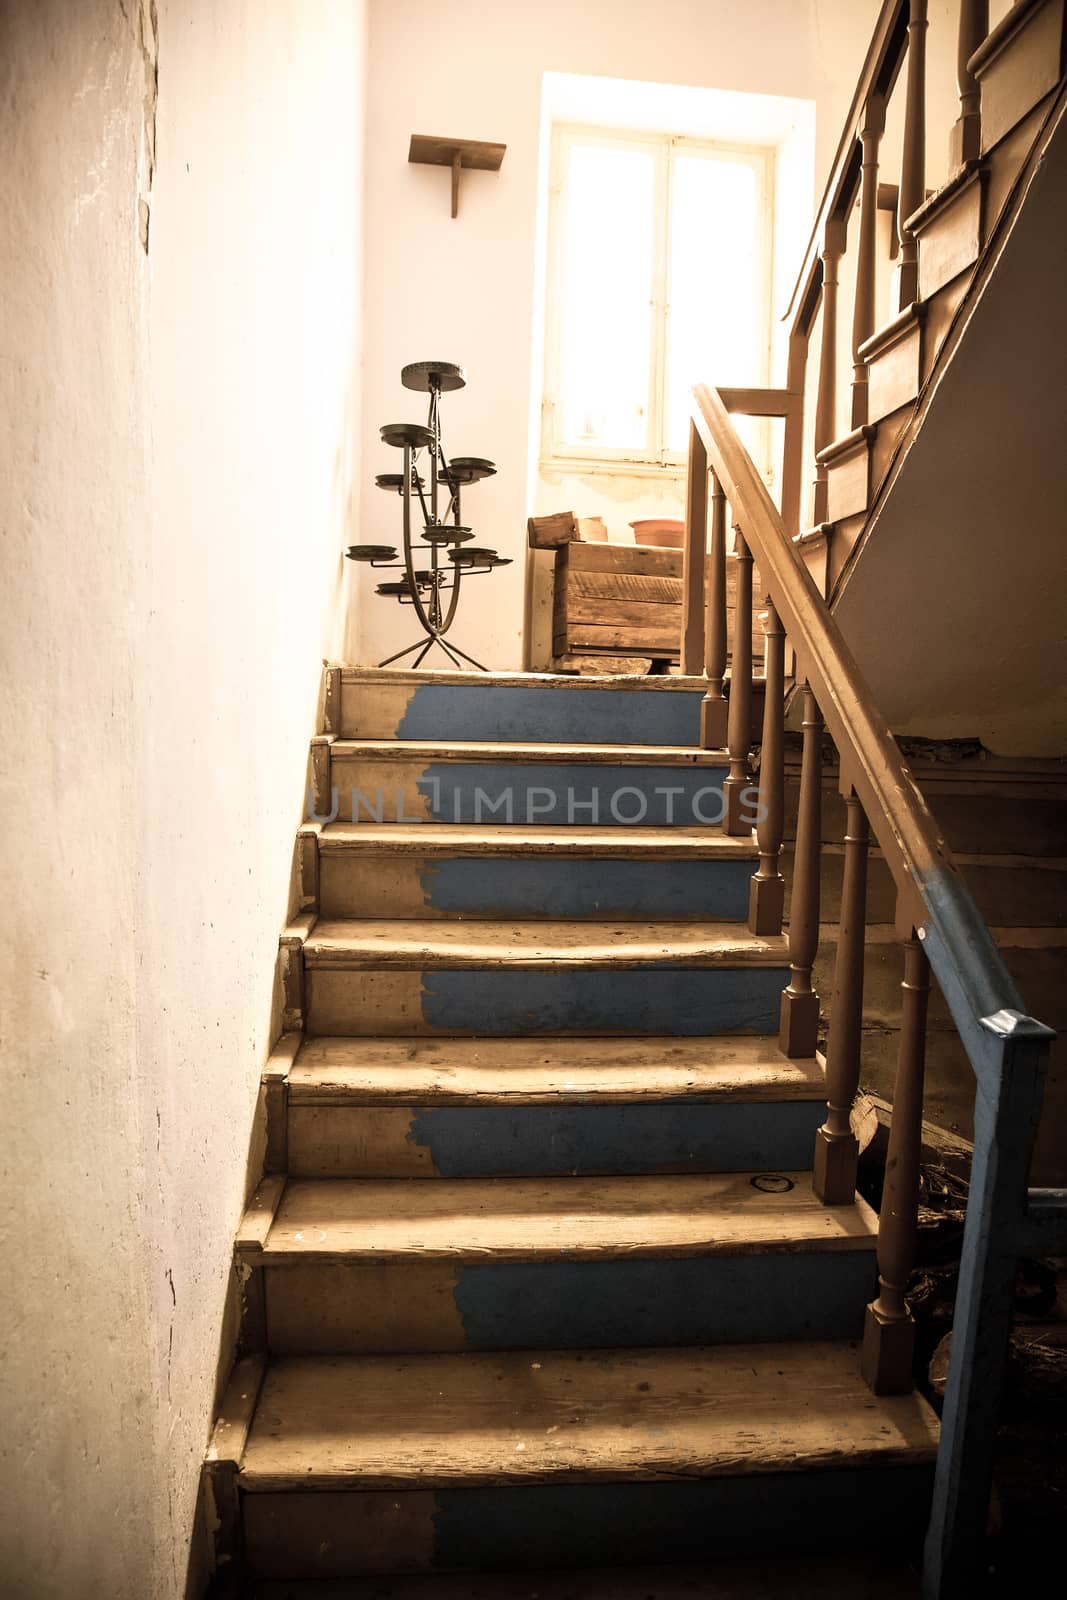 Vintage stairs, selective focus on the wooden steps. by motorolka